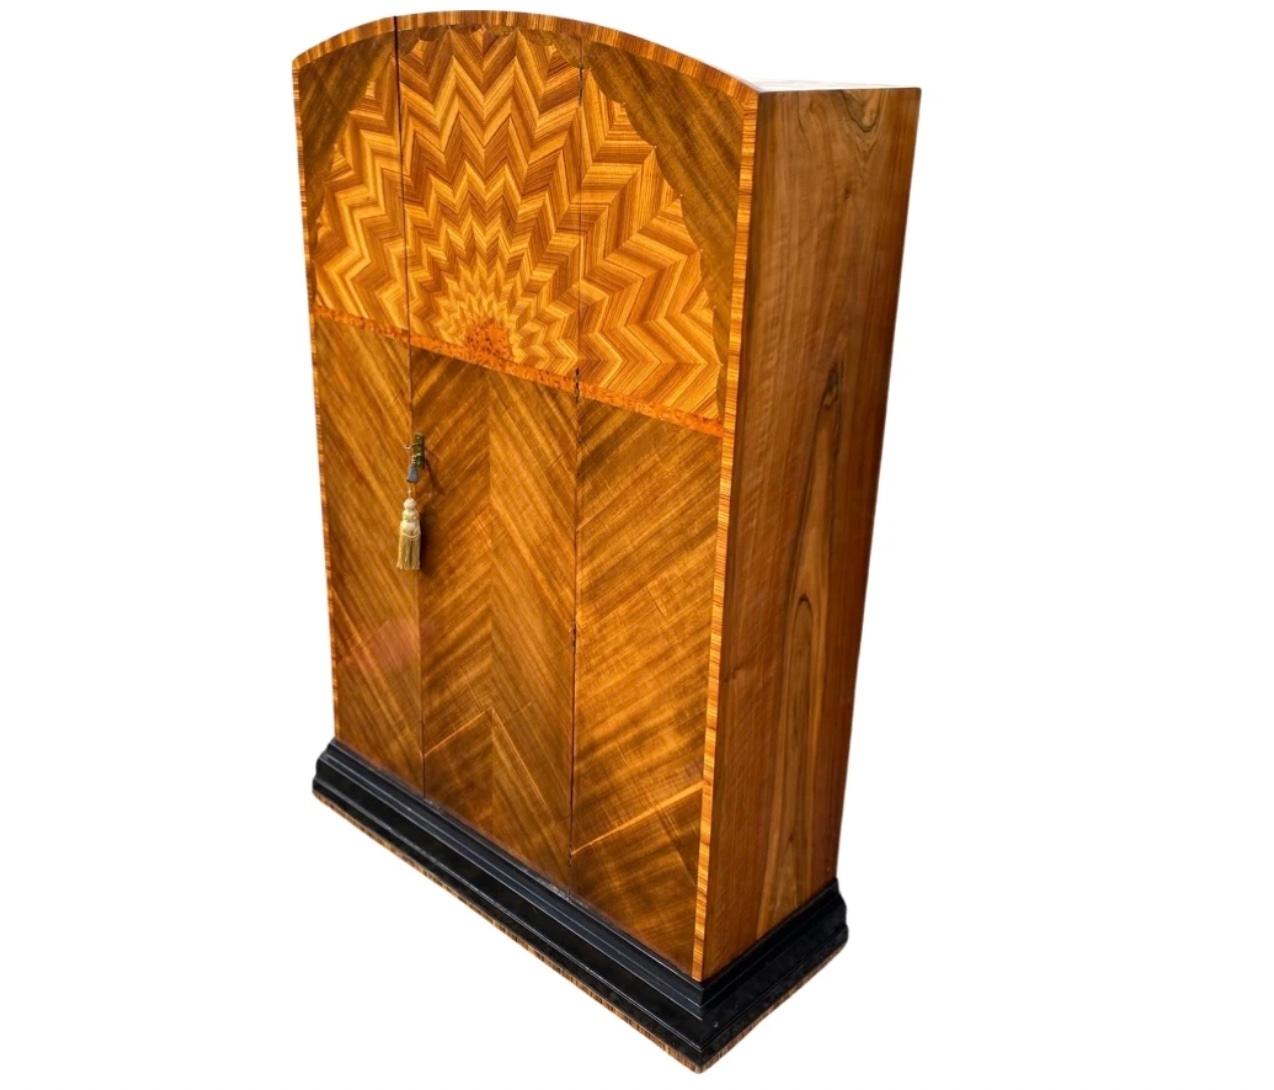 We are pleased to offer this fabulous 1920s Art Deco Wardrobe recently refurbished in our workshops. This absolutely stunning example features an amazing herringbone fan inlay made entirely from stunning white Macassar veneers. This dominates the